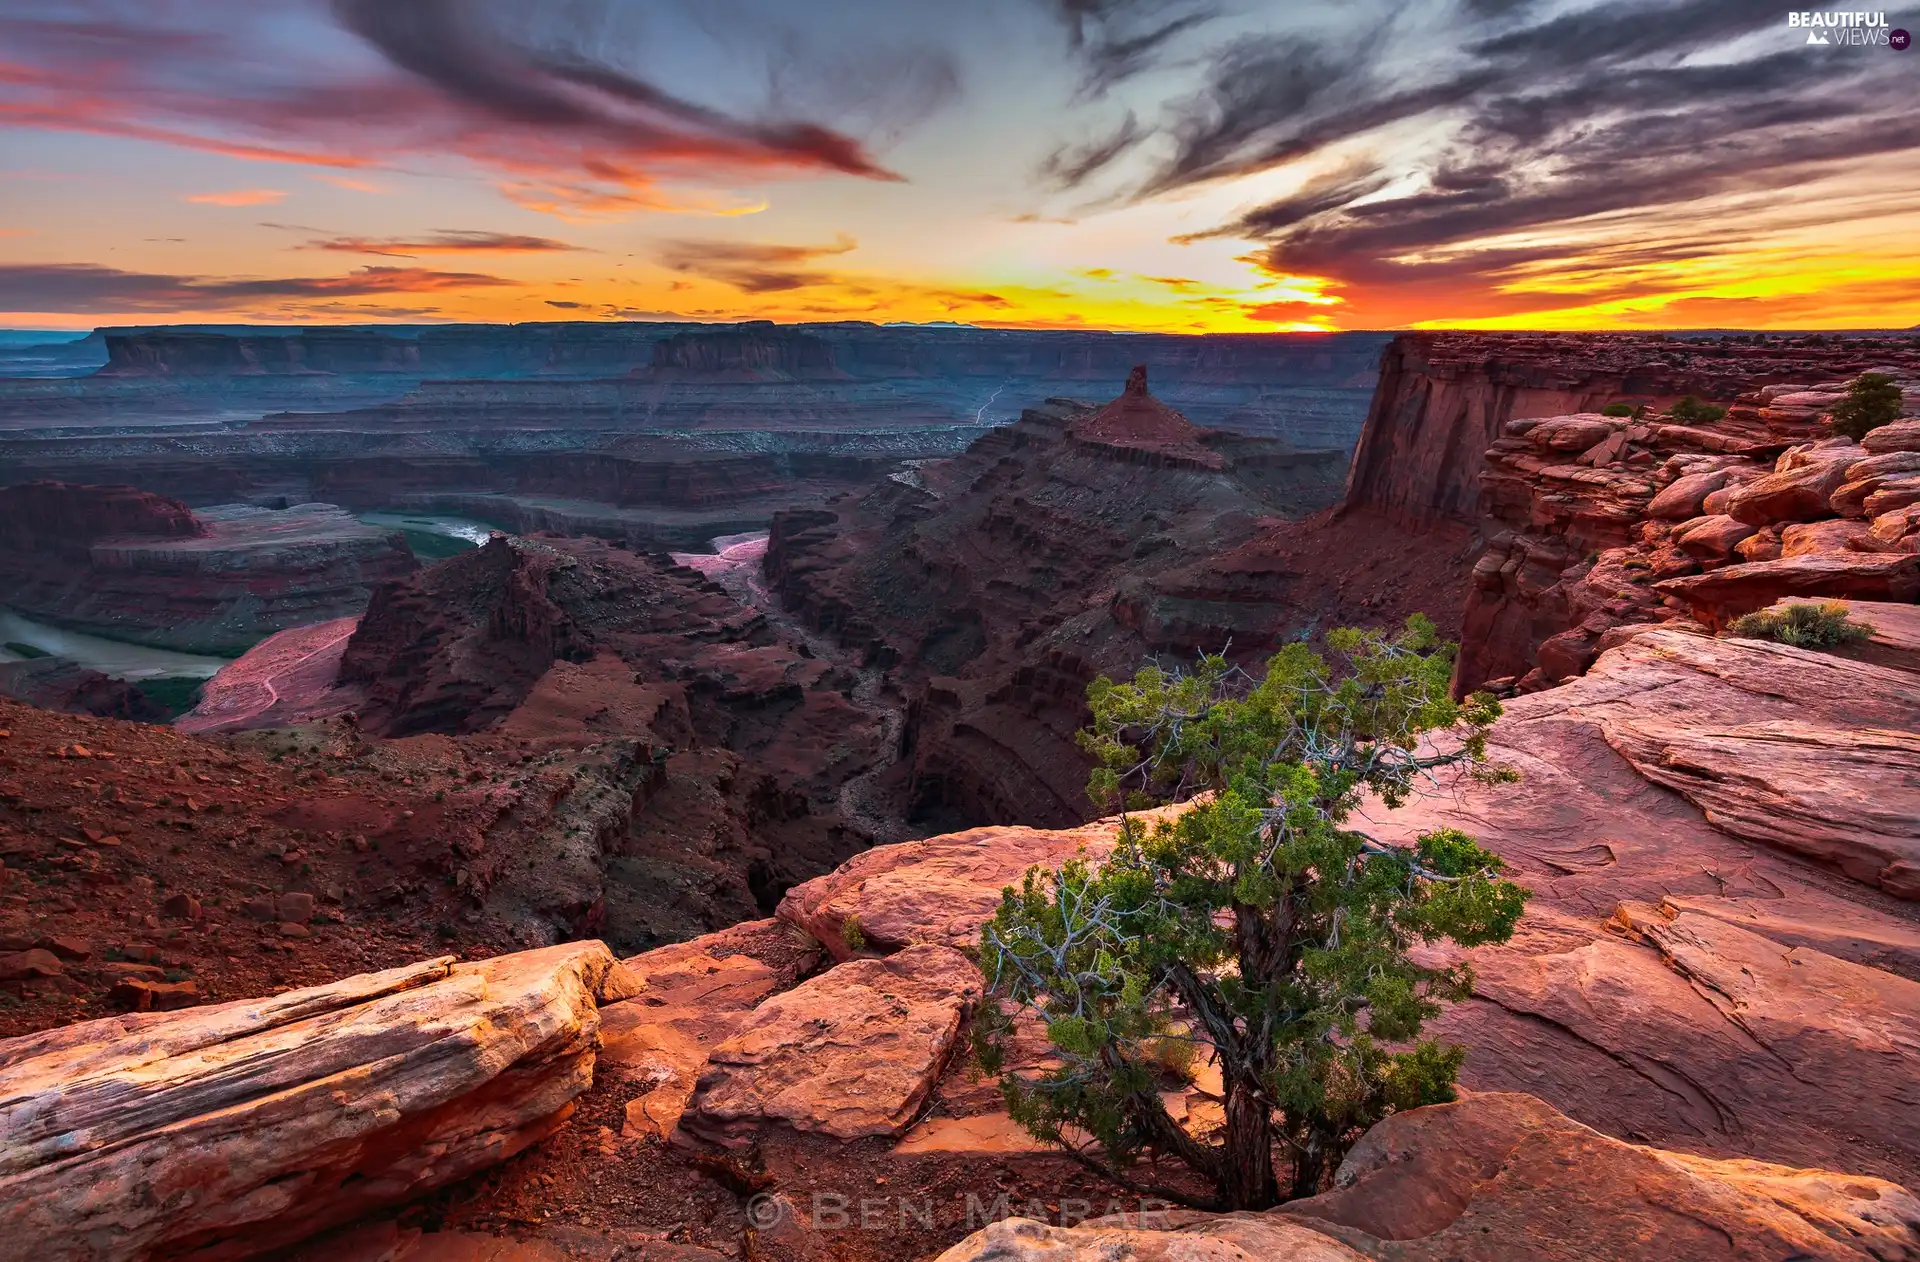 rocks, trees, The United States, Great Sunsets, Utah State, The Colorado River, canyon, State Park Dead Horse Point